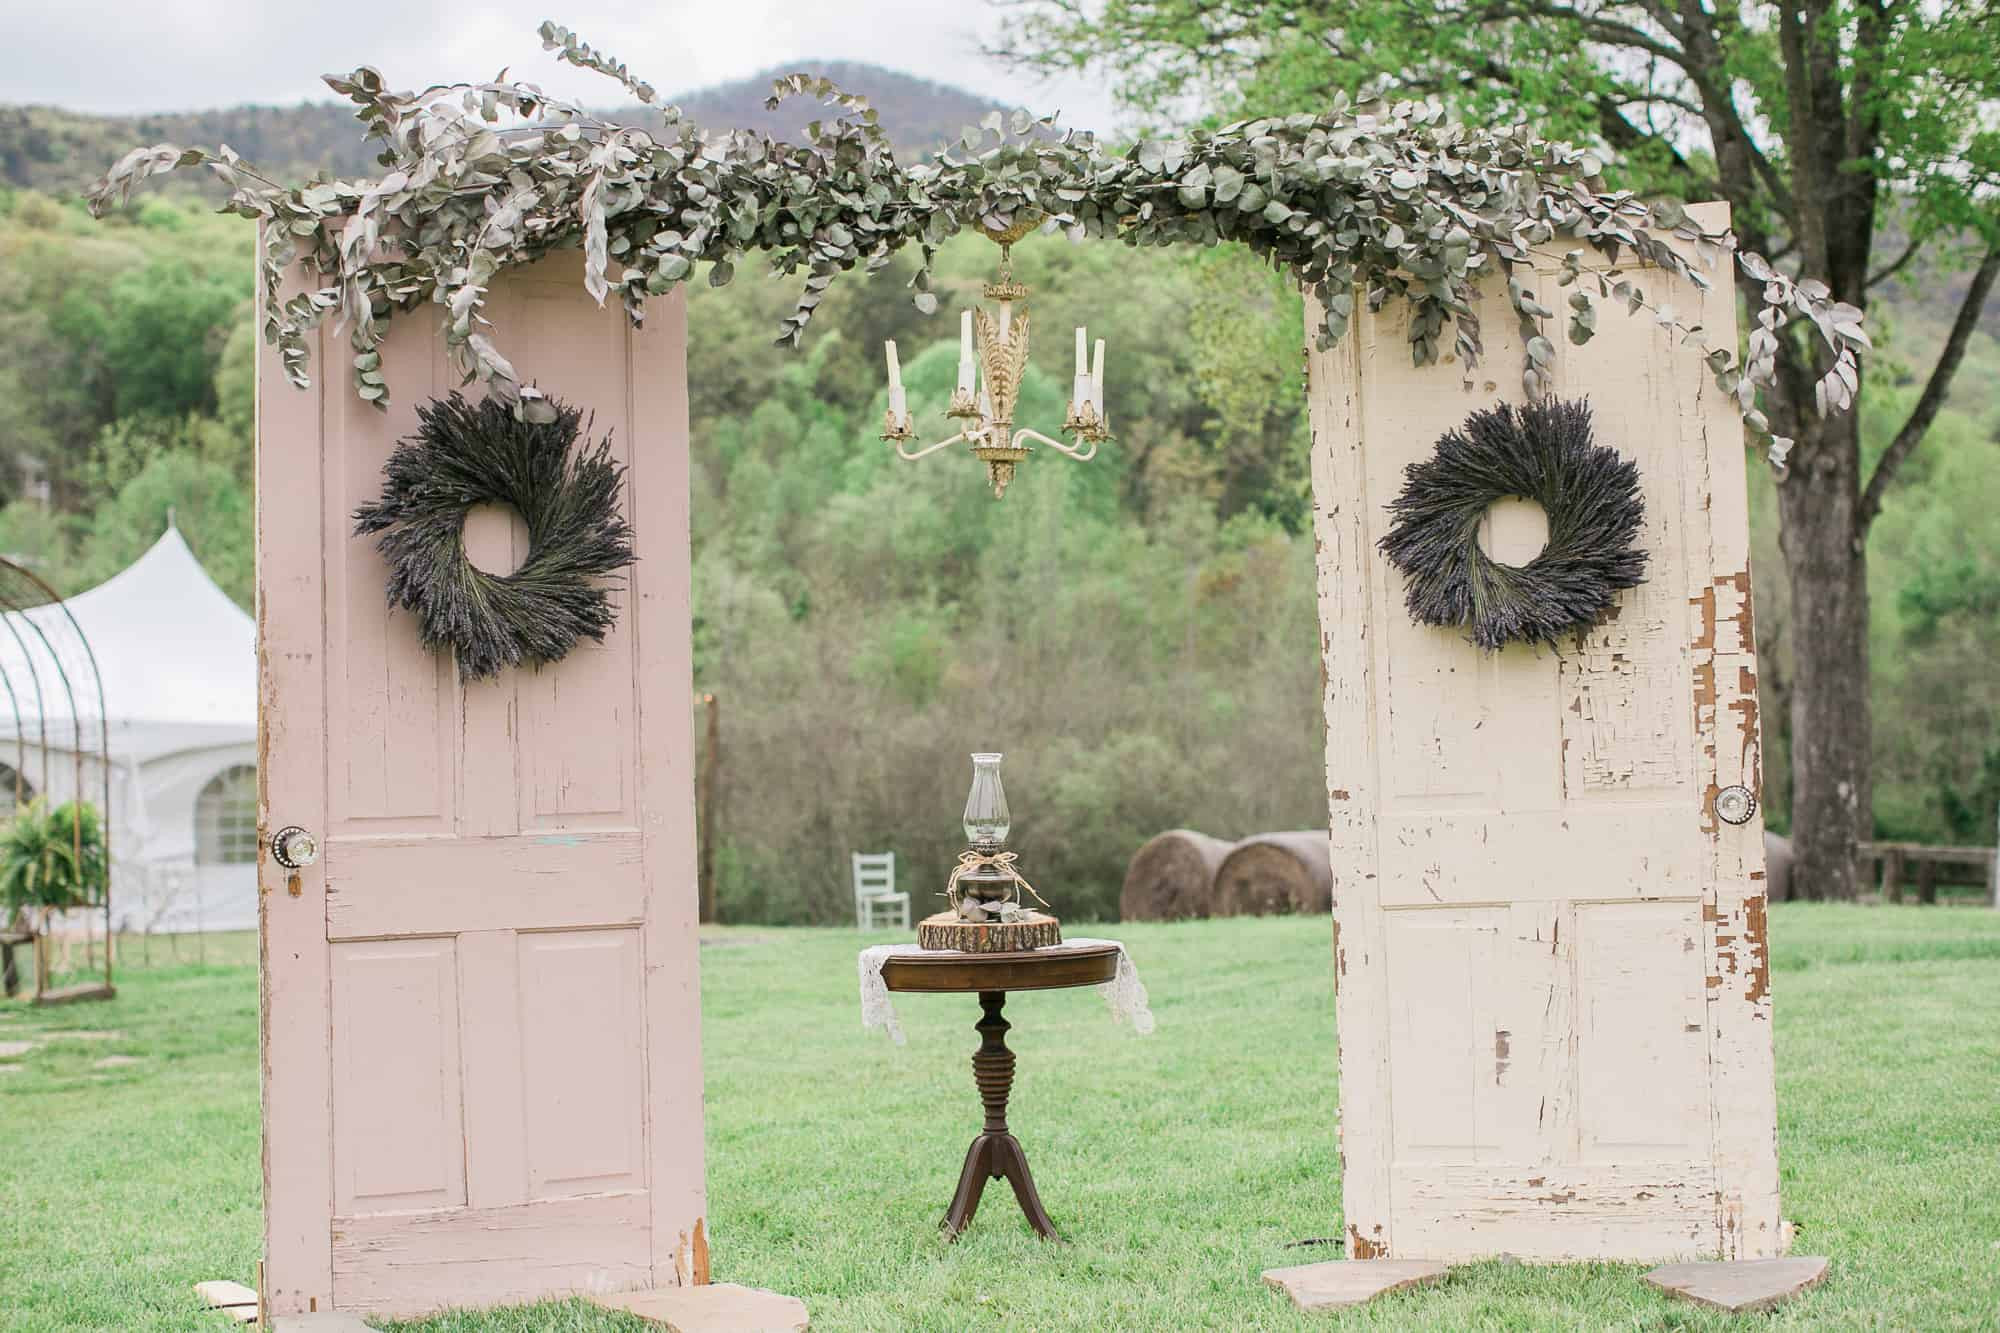 DIY Archway For Wedding
 15 DIY Wedding Arches To Highlight Your Ceremony With